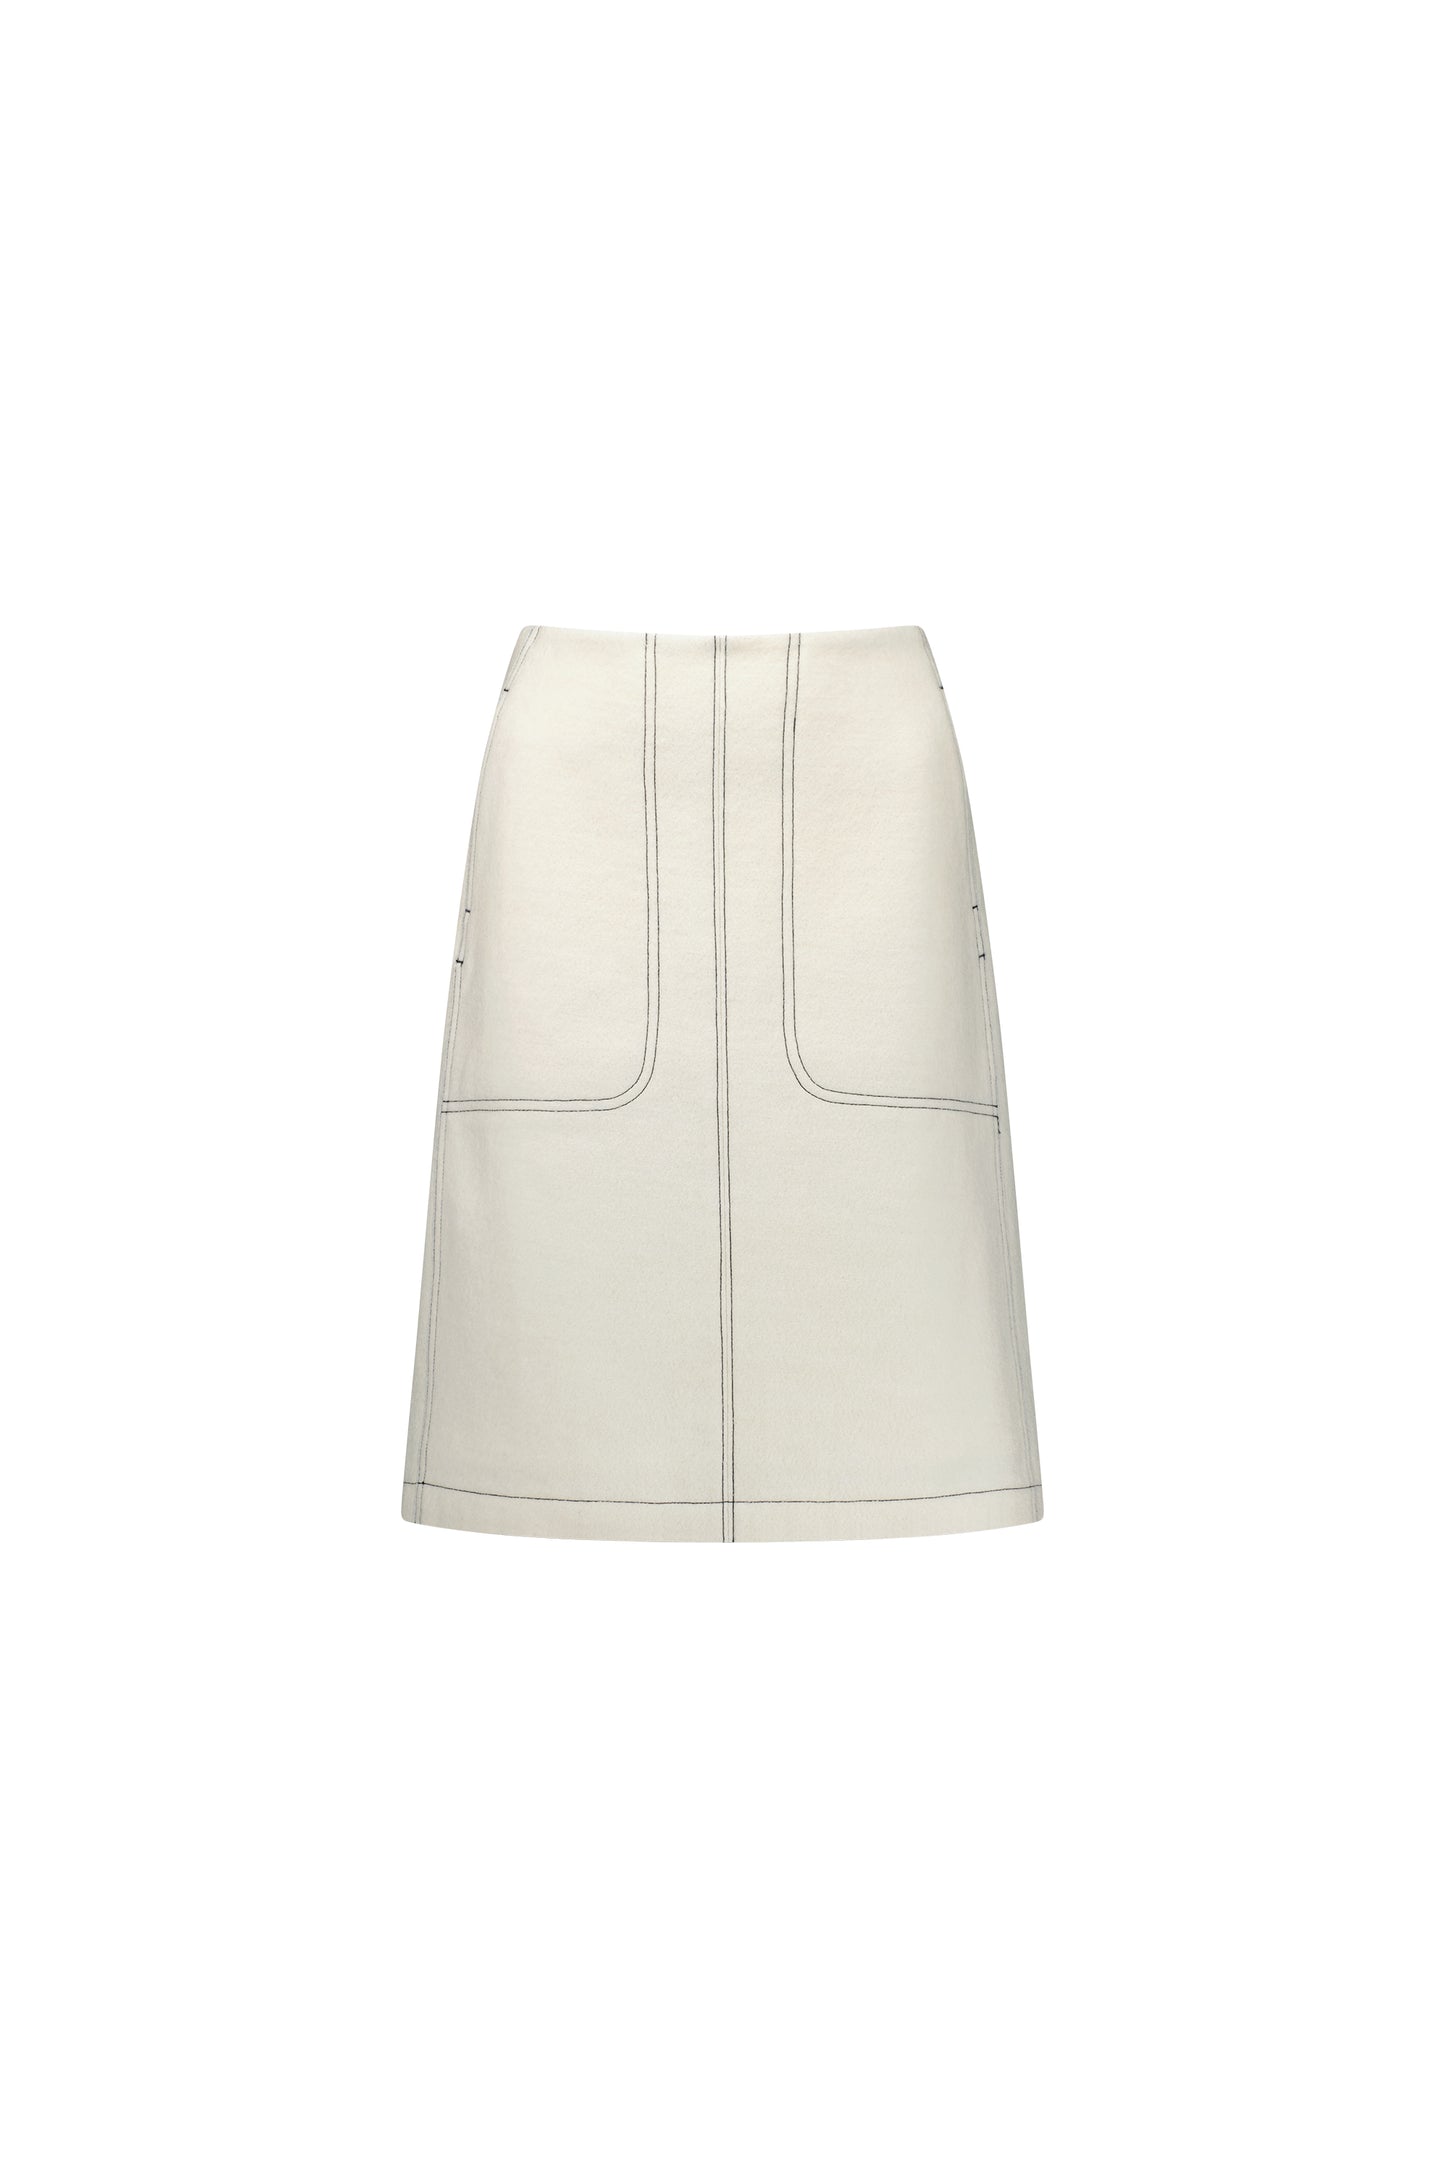 Vassalli - 7054W Knee length Skirt with Contrast Stitch Patch Pockets - Off White - INSTORE